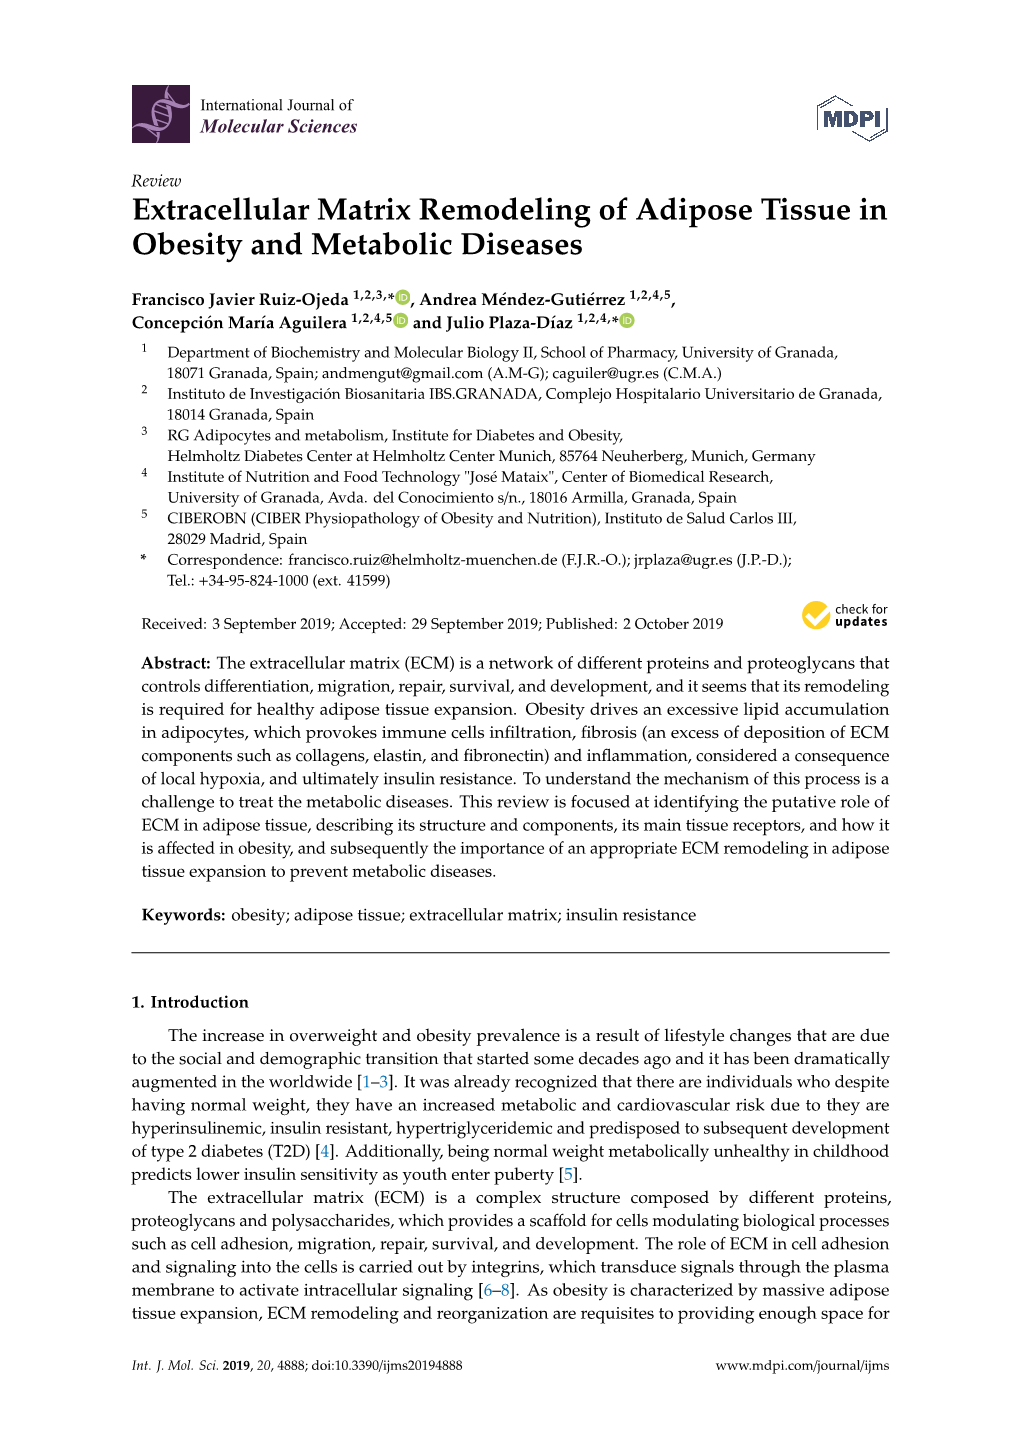 Extracellular Matrix Remodeling of Adipose Tissue in Obesity and Metabolic Diseases